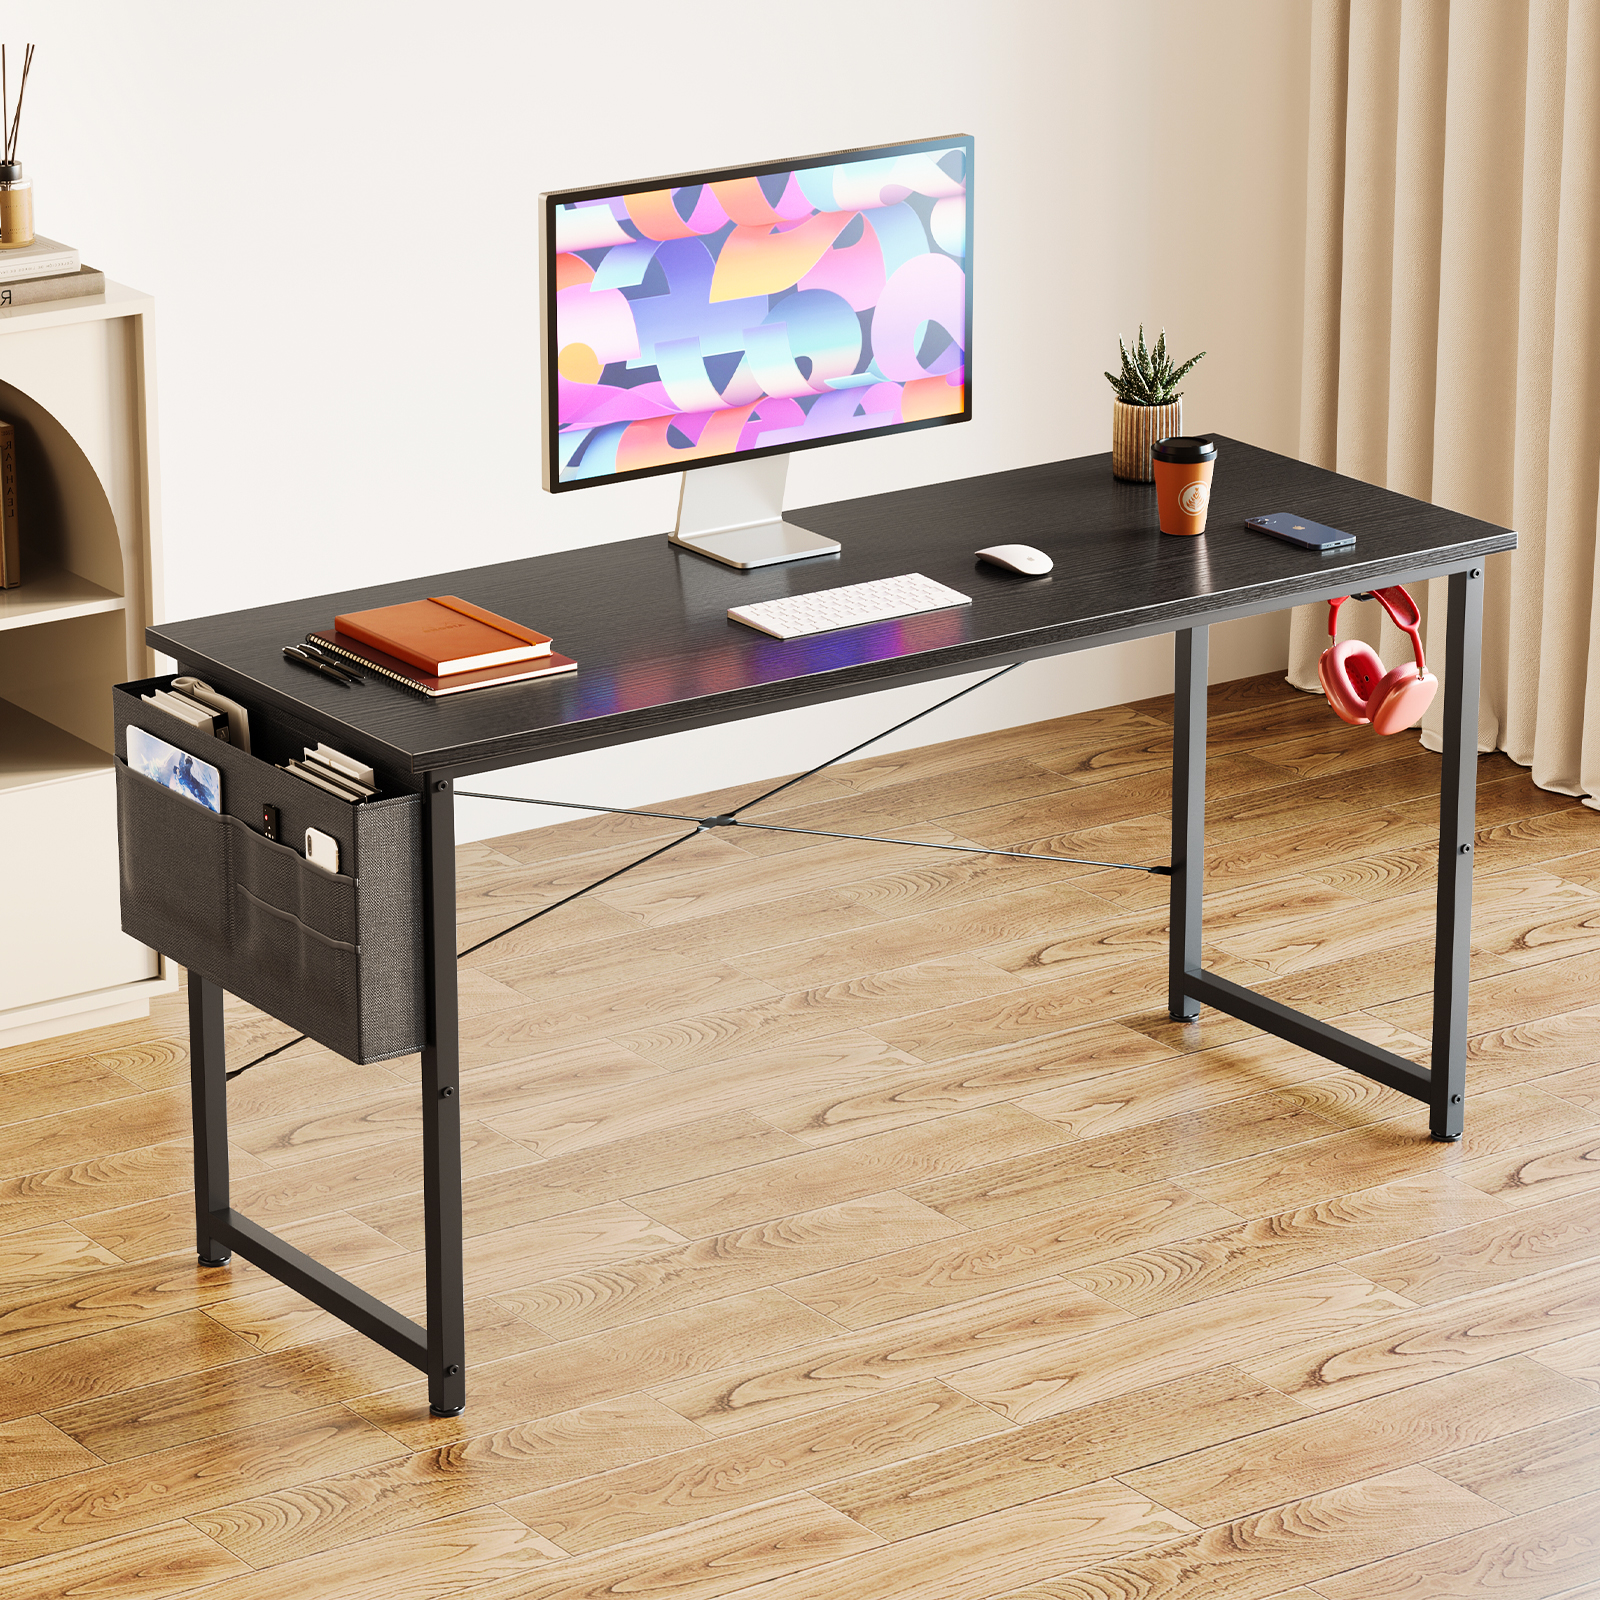 63 inch Computer Desk with Storage Bag, Modern Simple Style Desk for Home Office, Large Study Student Writing Desk, Black - image 2 of 5